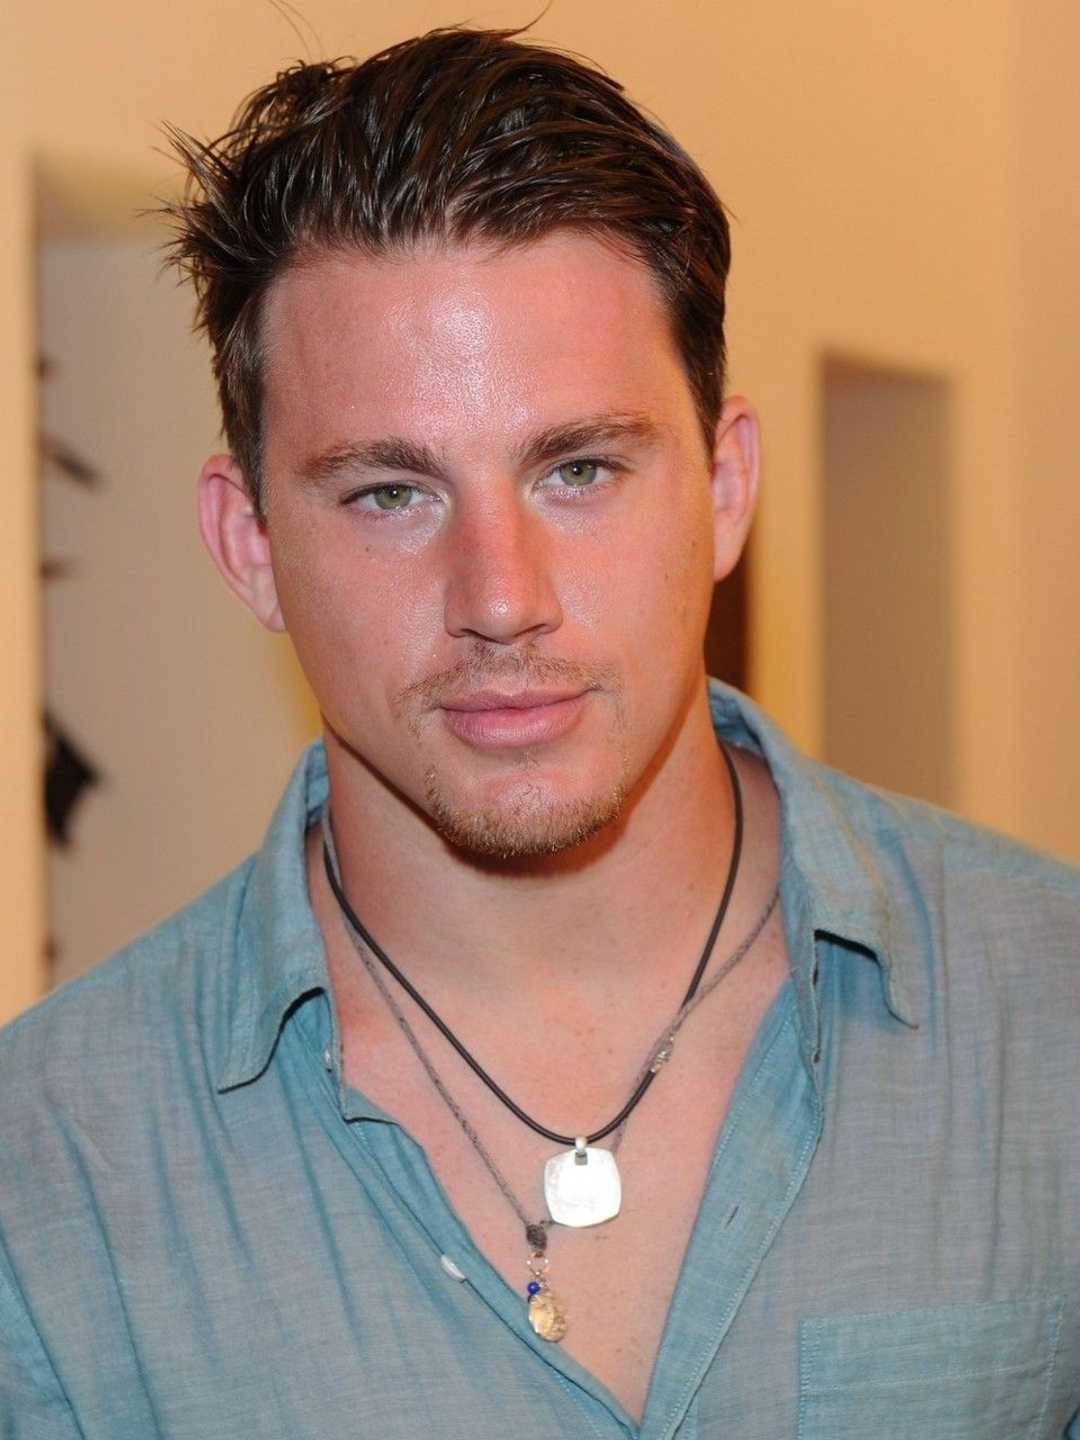 Channing Tatum does he have a wife